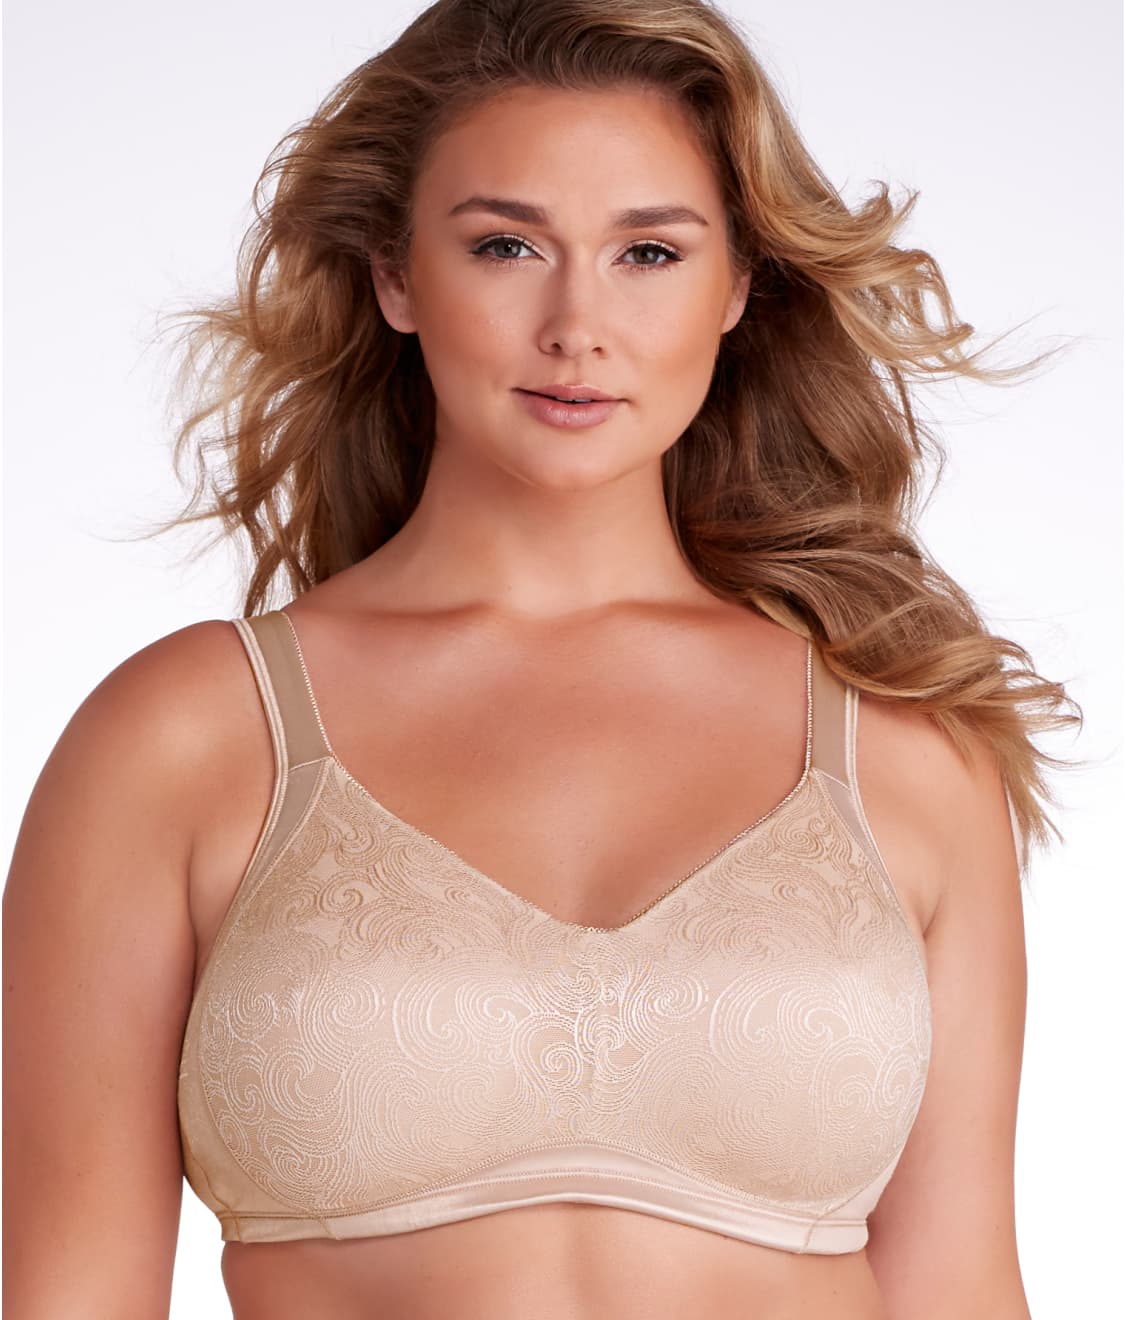 Shop Playtex Women's Cotton Bras up to 70% Off